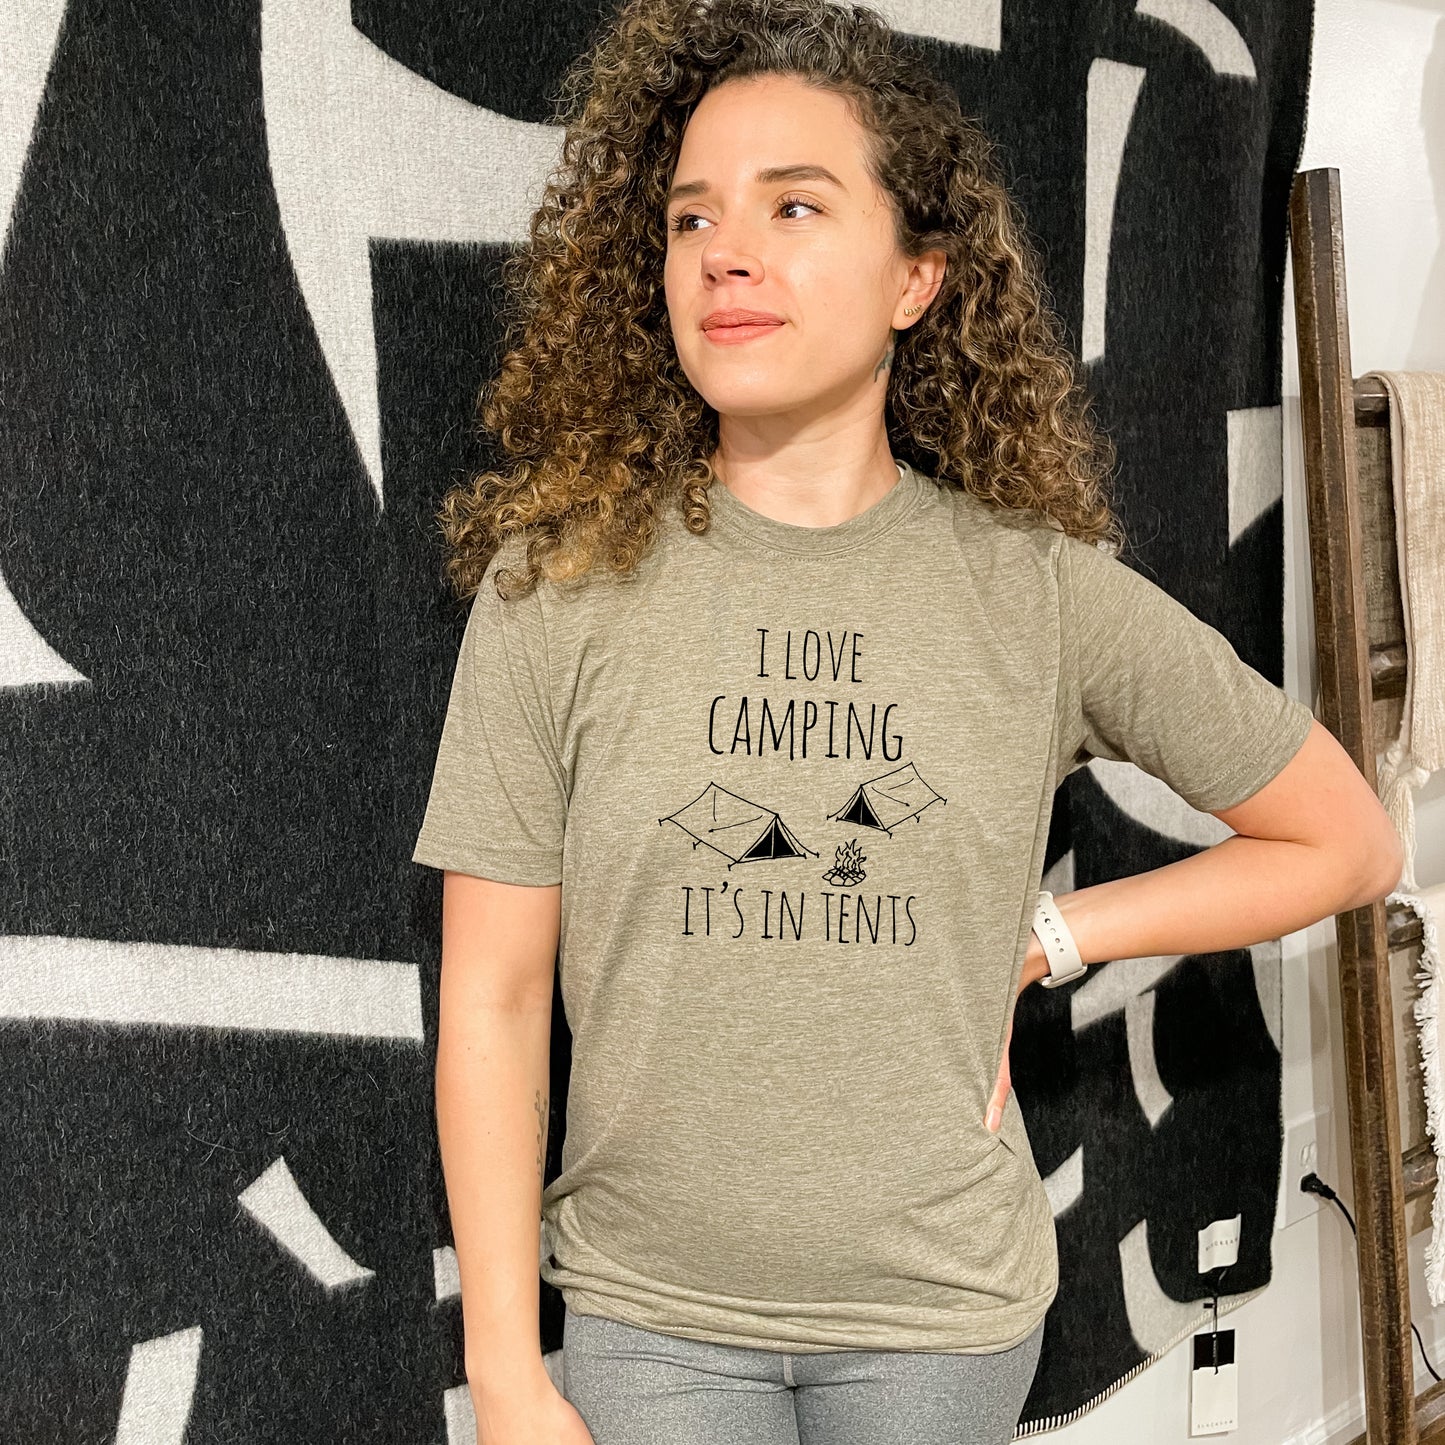 I Love Camping, It's In Tents - Men's / Unisex Tee - Stonewash Blue or Sage